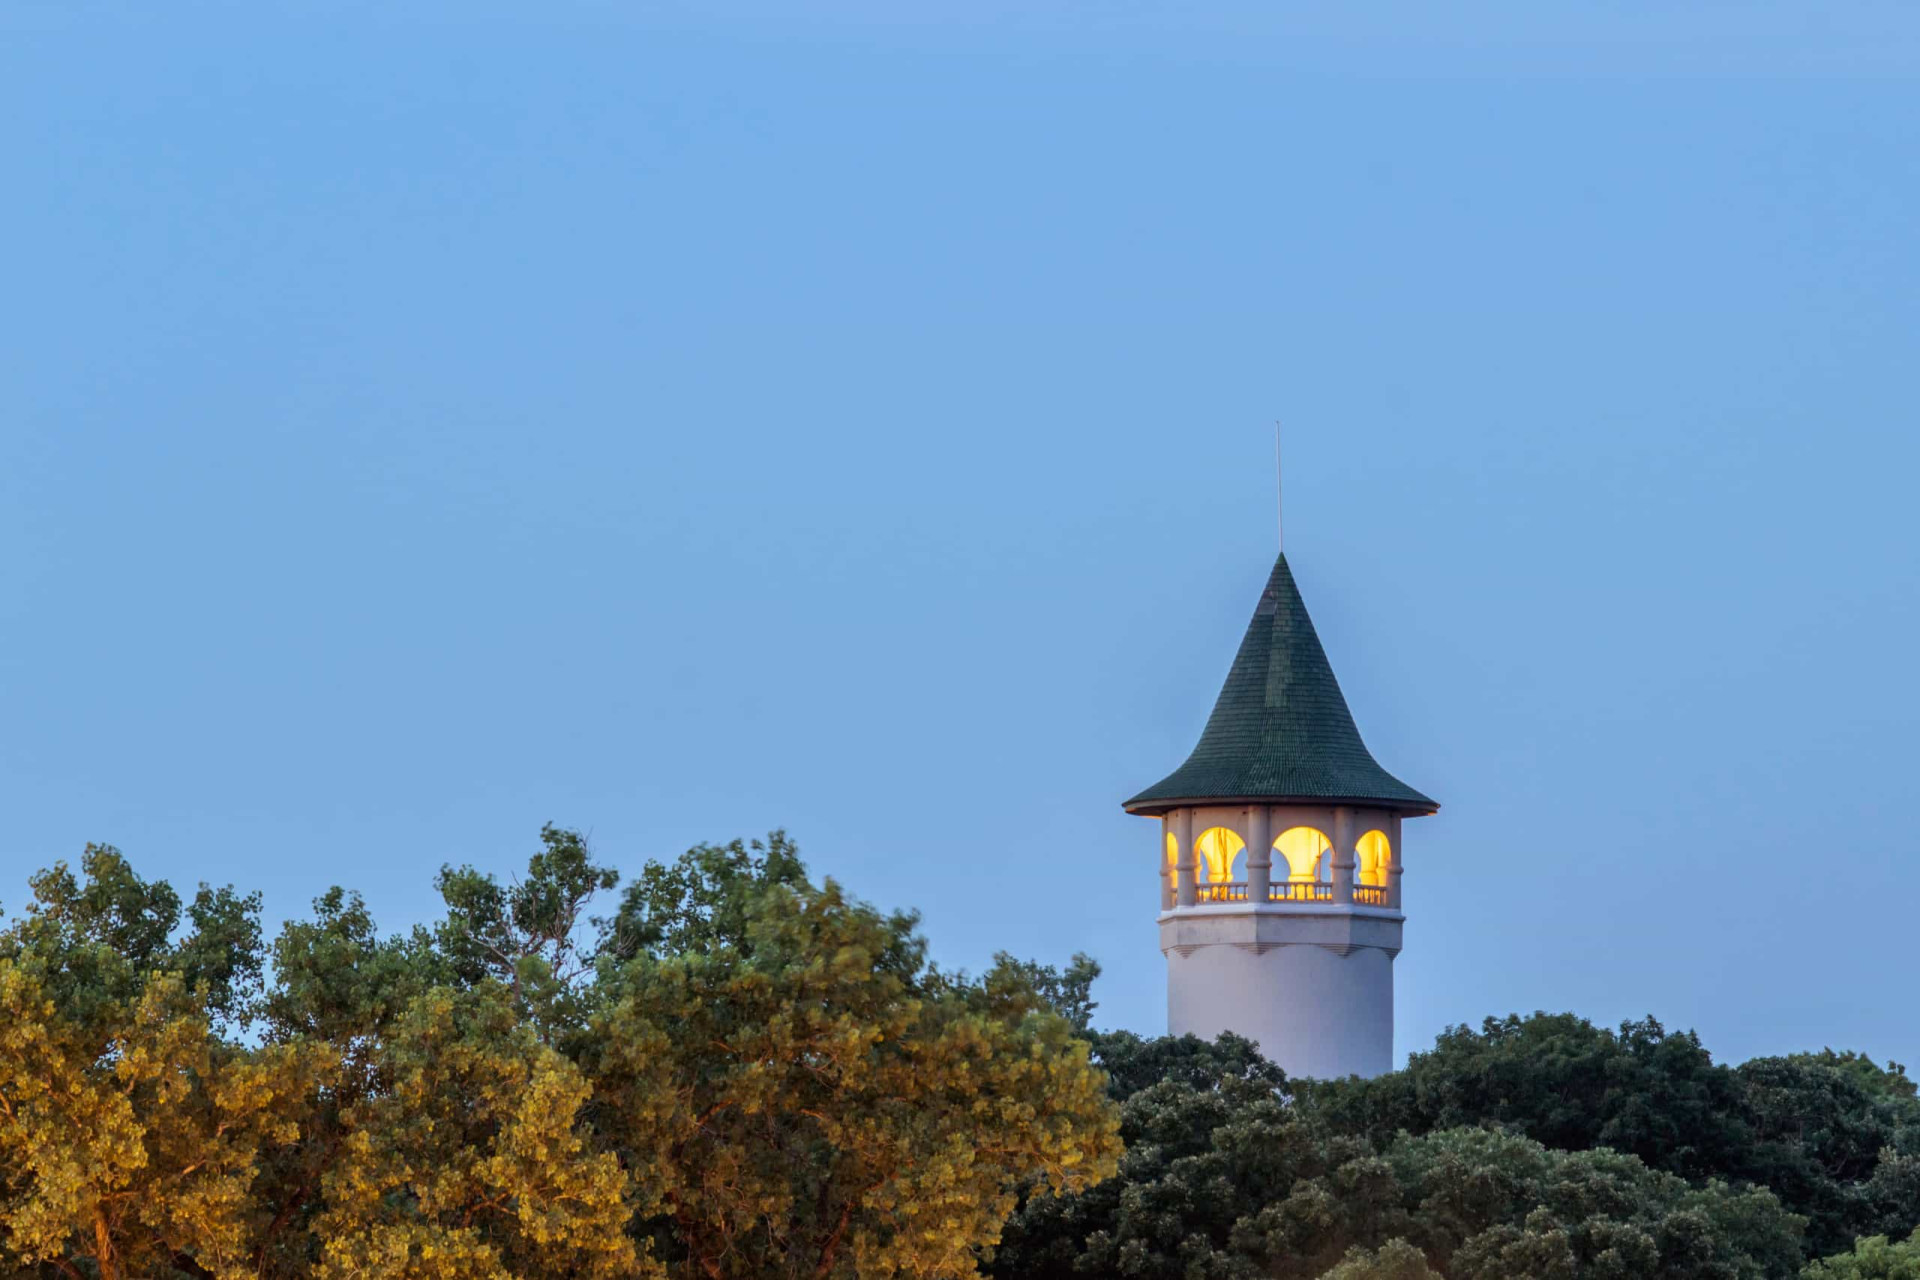 <p>Once a year, on the first Friday after Memorial Day, the landmark Prospect Park Water Tower, known locally as the "Witches Hat," opens to the public. The views from the top are spellbinding.</p><p><a href="https://www.msn.com/en-us/community/channel/vid-7xx8mnucu55yw63we9va2gwr7uihbxwc68fxqp25x6tg4ftibpra?cvid=94631541bc0f4f89bfd59158d696ad7e">Follow us and access great exclusive content every day</a></p>